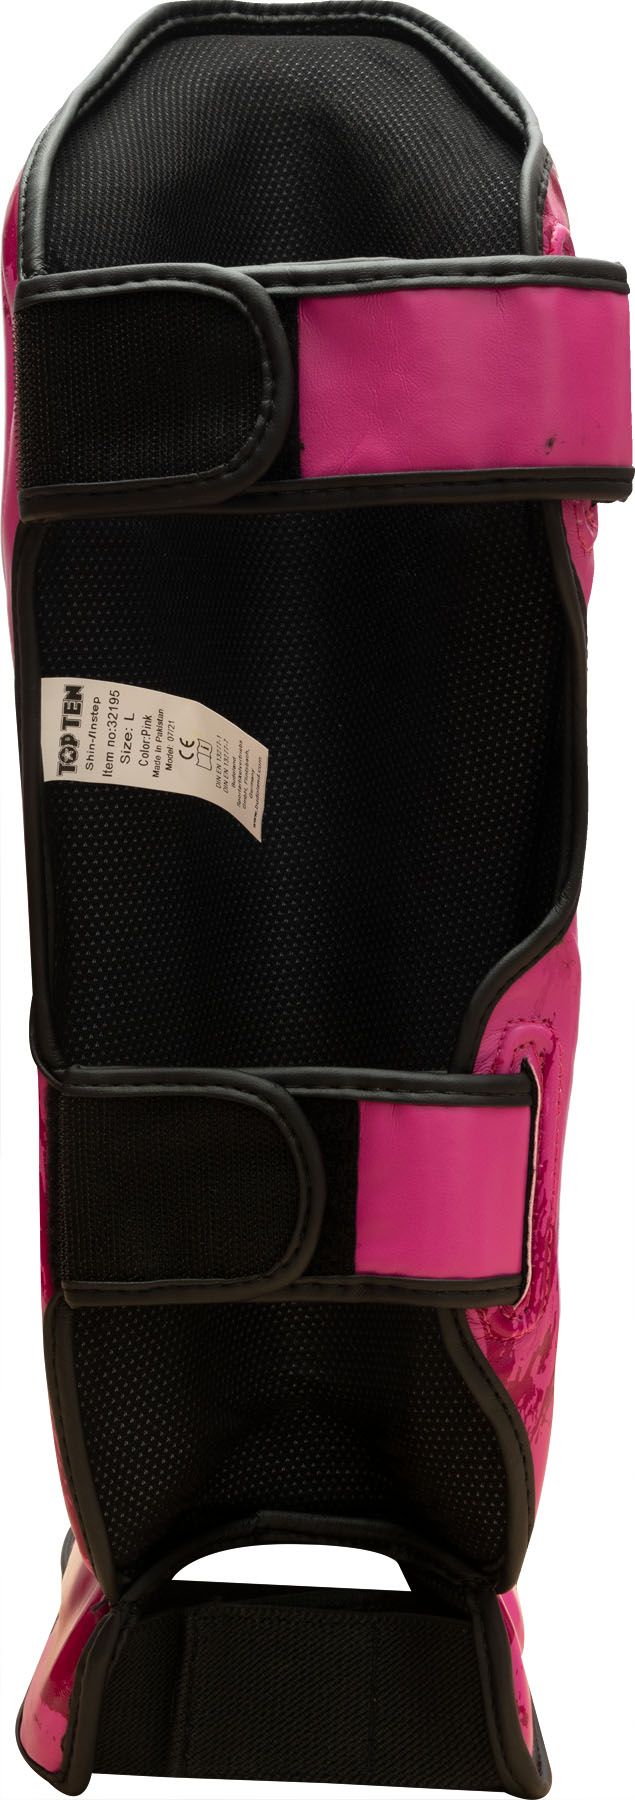 Top Ten Shin and Instep Guard “Power Ink” - pink